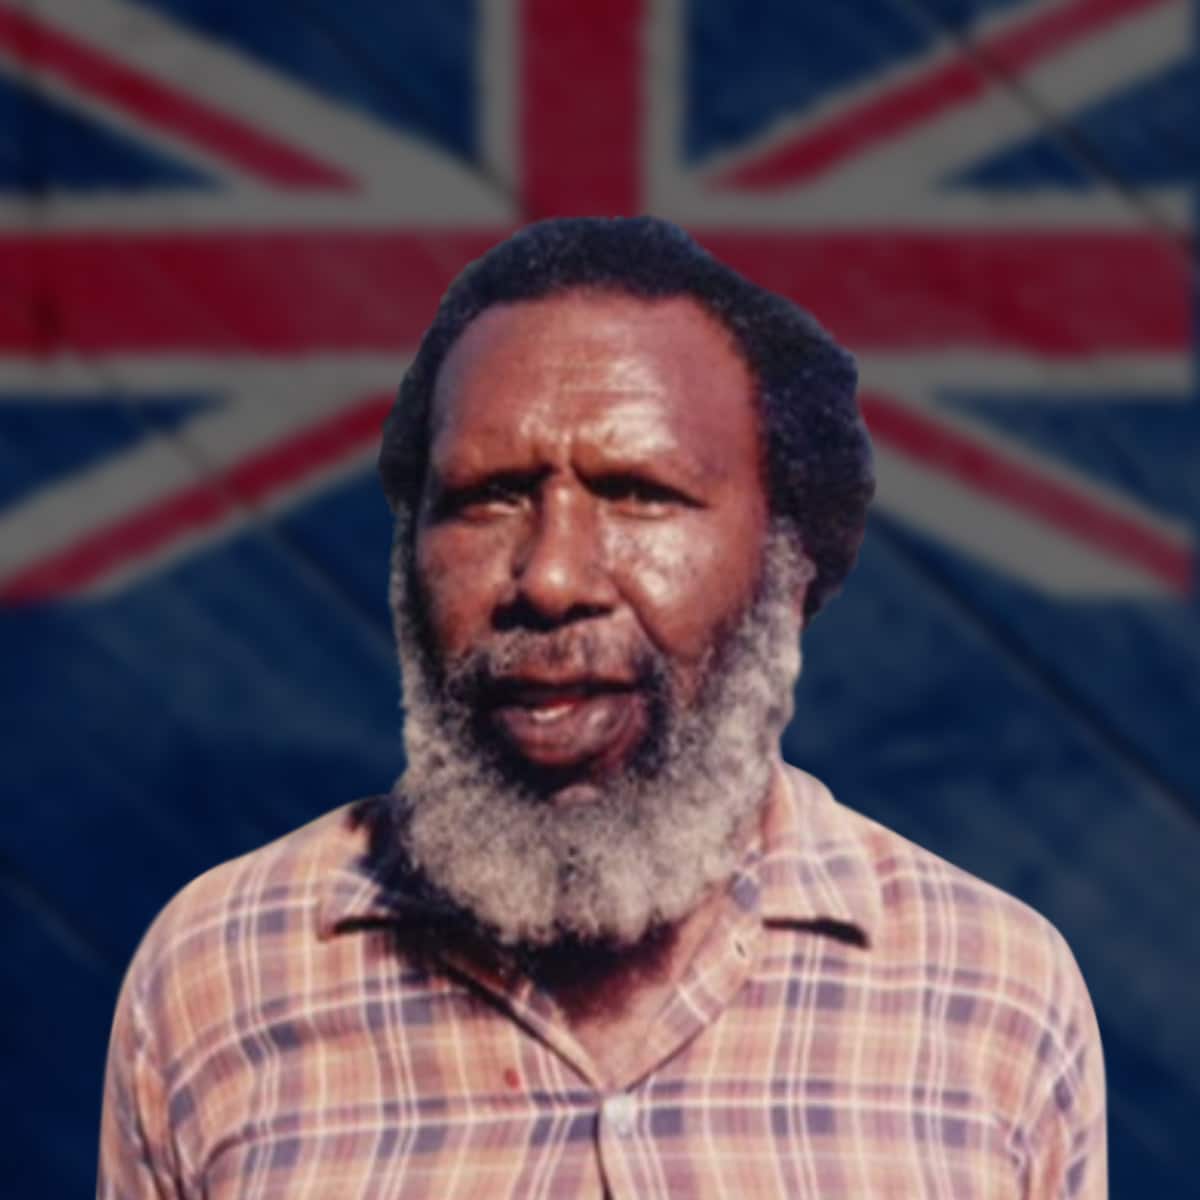 Eddie mabo his koiki life known sydney australian land rights role aboriginal activist harbour madame scoot darling tussauds wild indigenous